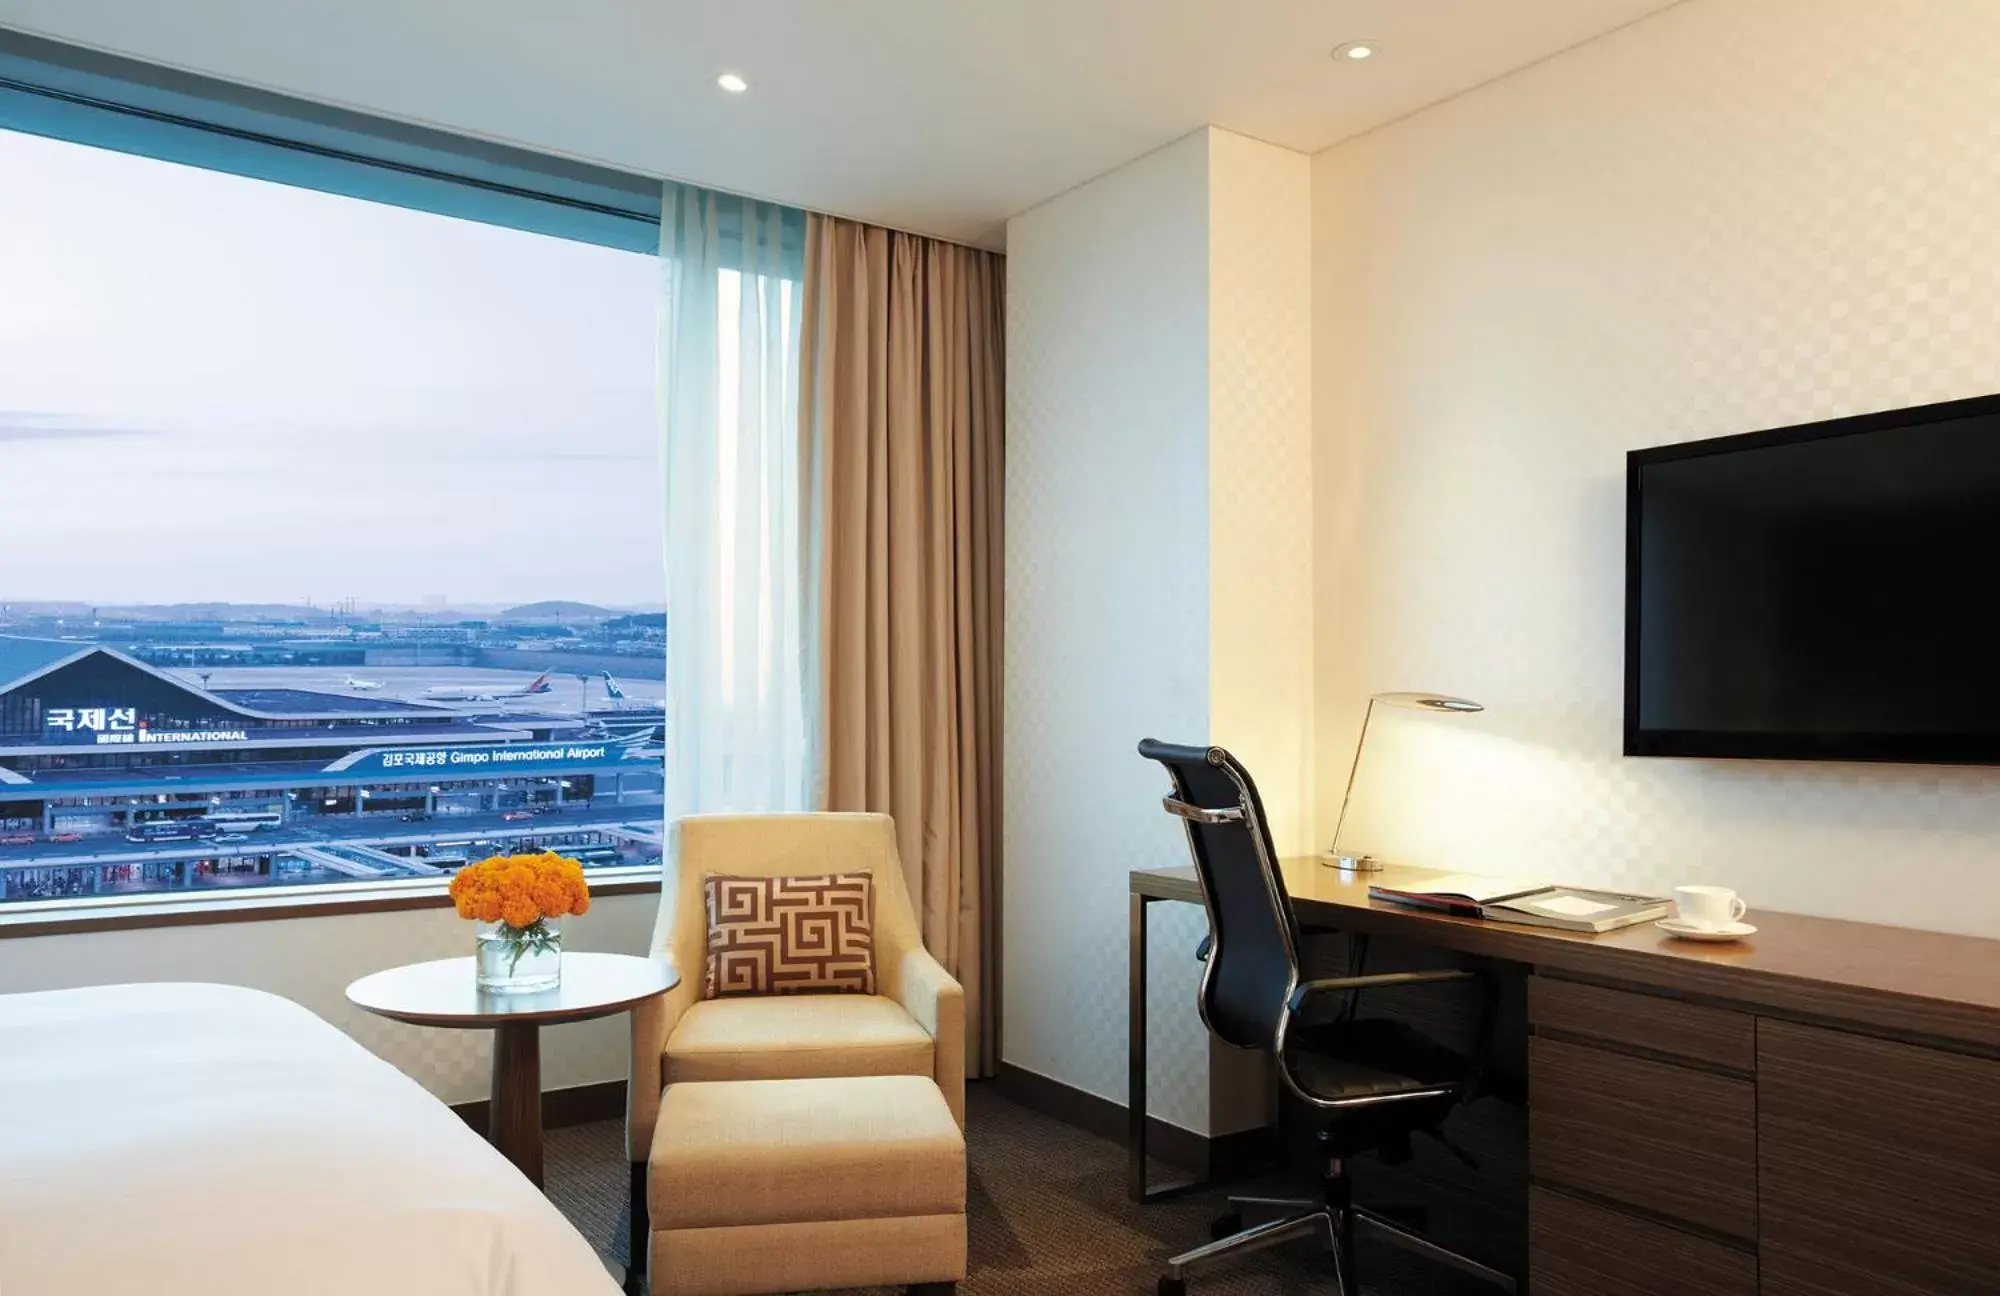 Area and facilities, TV/Entertainment Center in LOTTE City Hotel Gimpo Airport